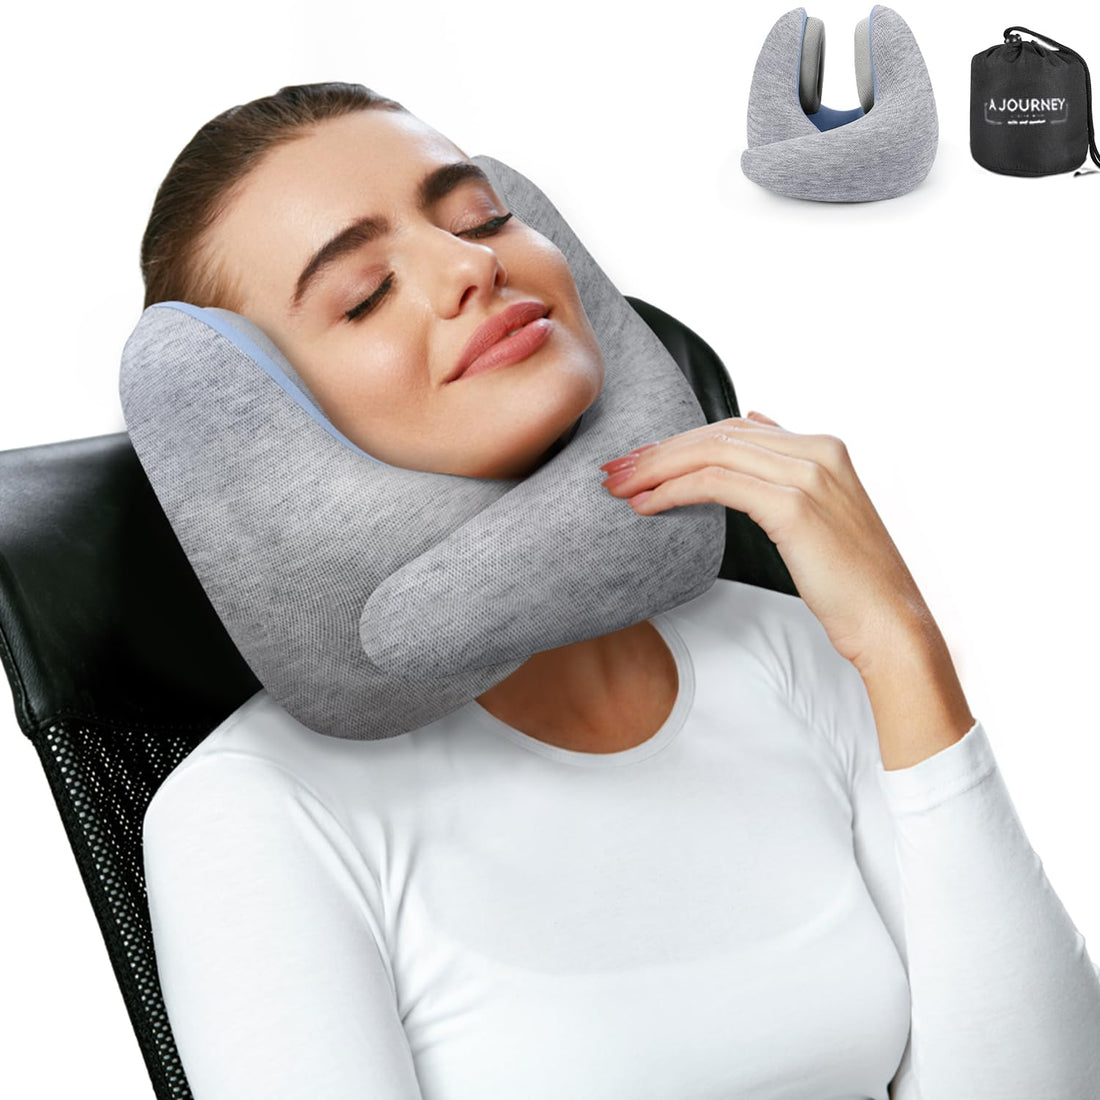 SOUTHVO Neck Pillow Airplane with Noise Canceling Earmuffs NRR 25dB, Memory Foam Airplane Pillow, 360°Neck Support Travel Accessories for Airplanes, Trains, Cars Office Napping (Dark Blue, M)